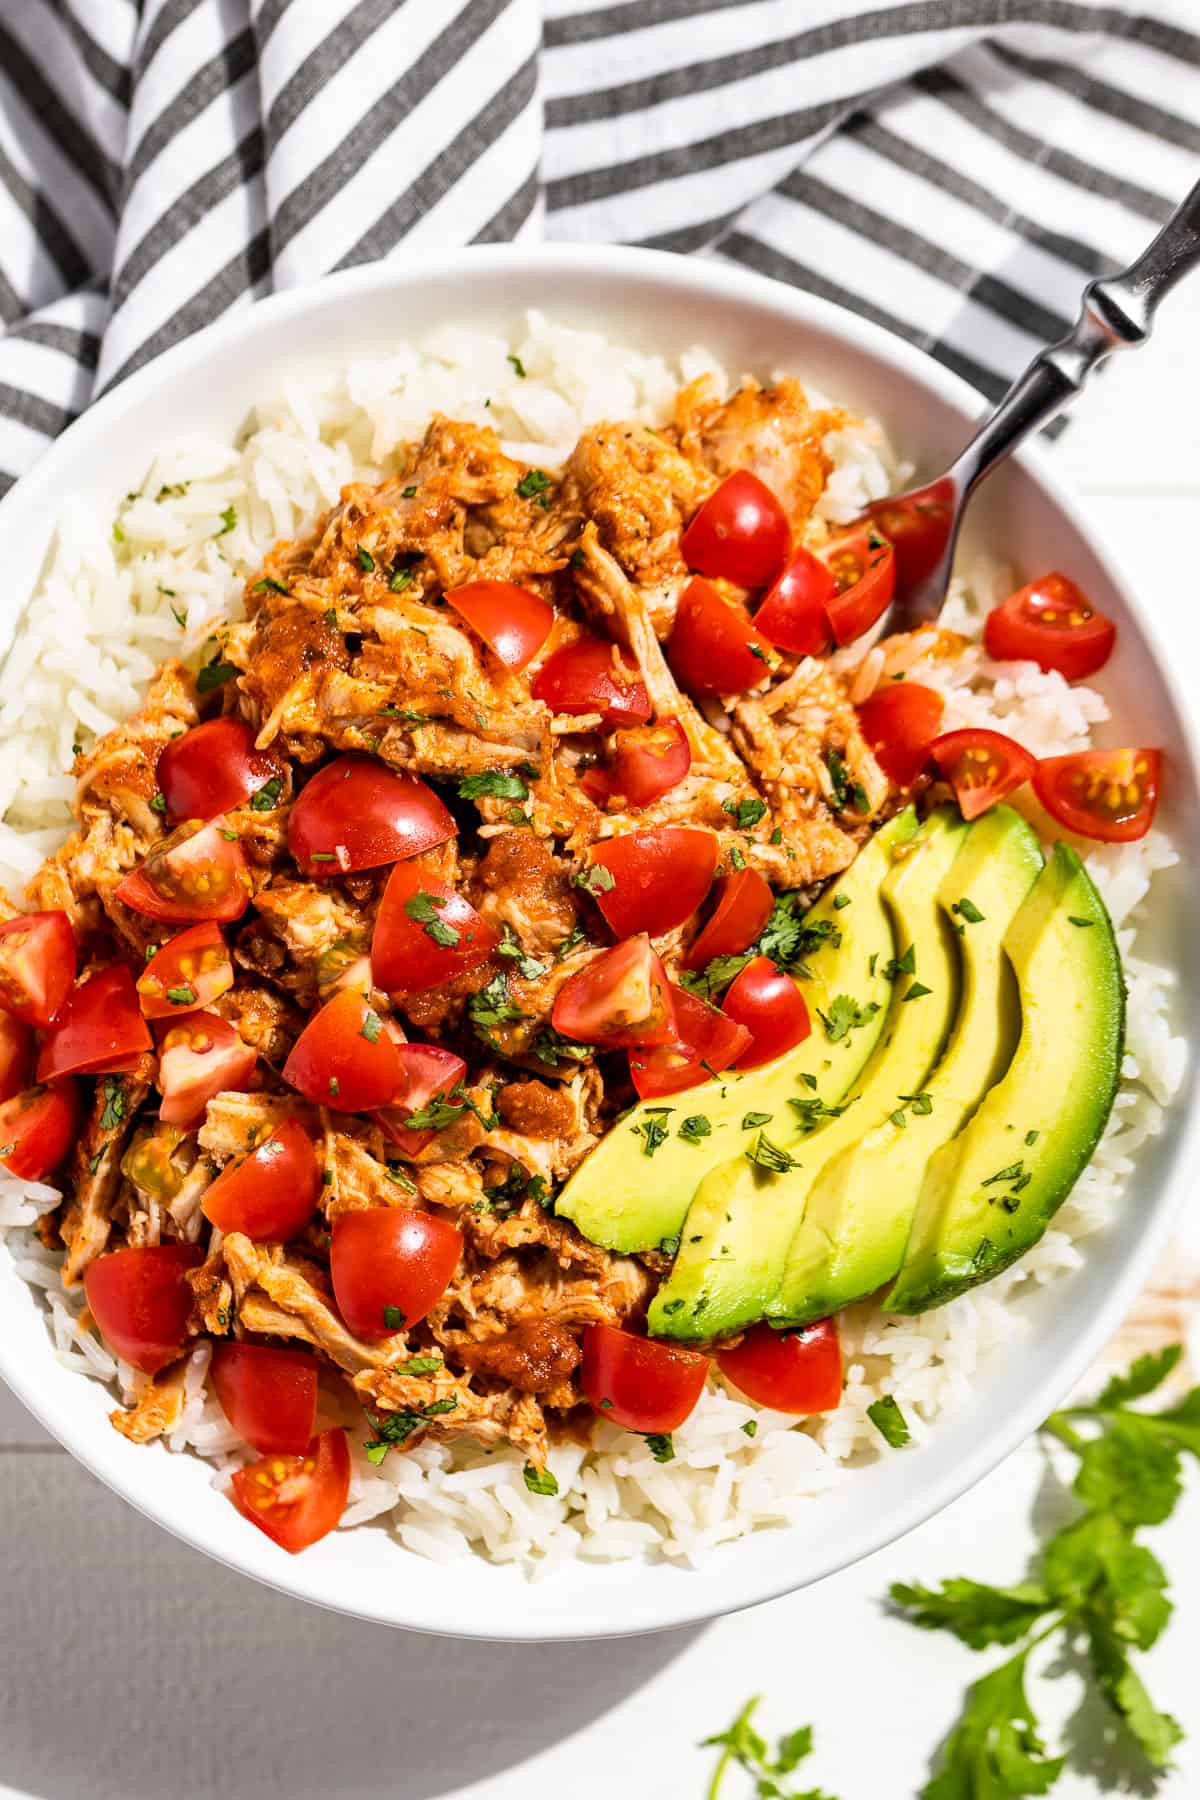 Shredded Chicken Tinga piled over steamed rice topped with fresh tomatoes, cilantro, and sliced avocados in a white bowl.